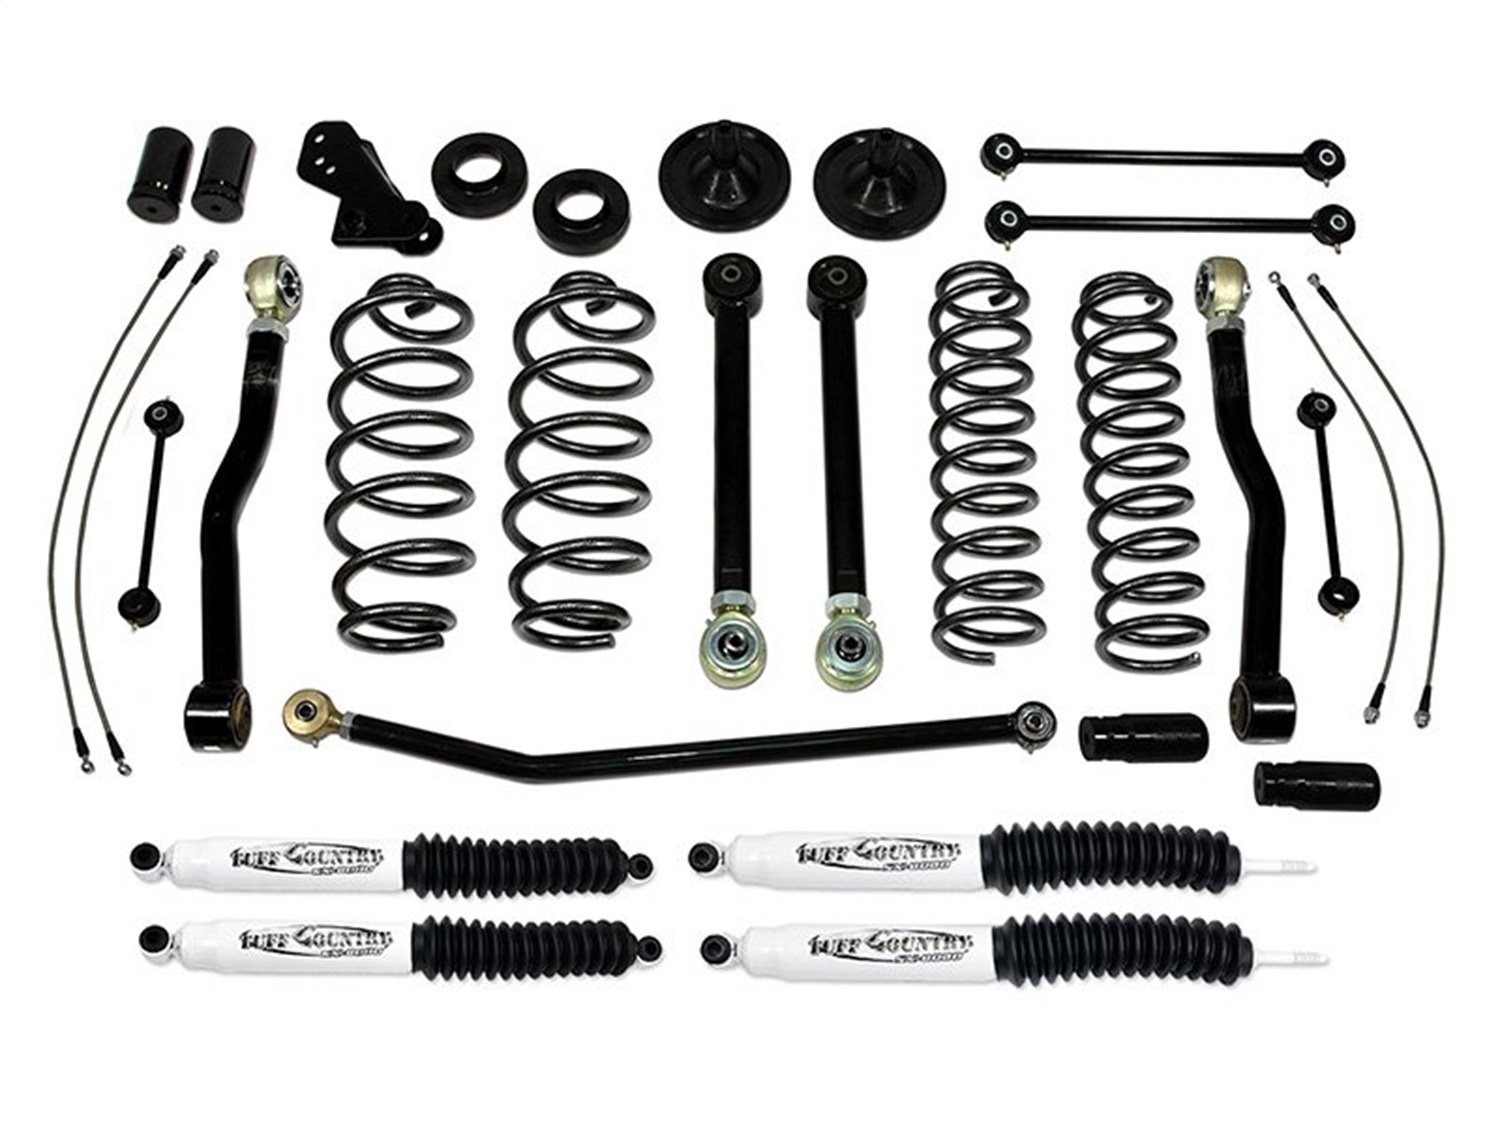 44000KN Front and Rear Suspension Lift Kit, Lift Amount: 4 in. Front/4 in. Rear